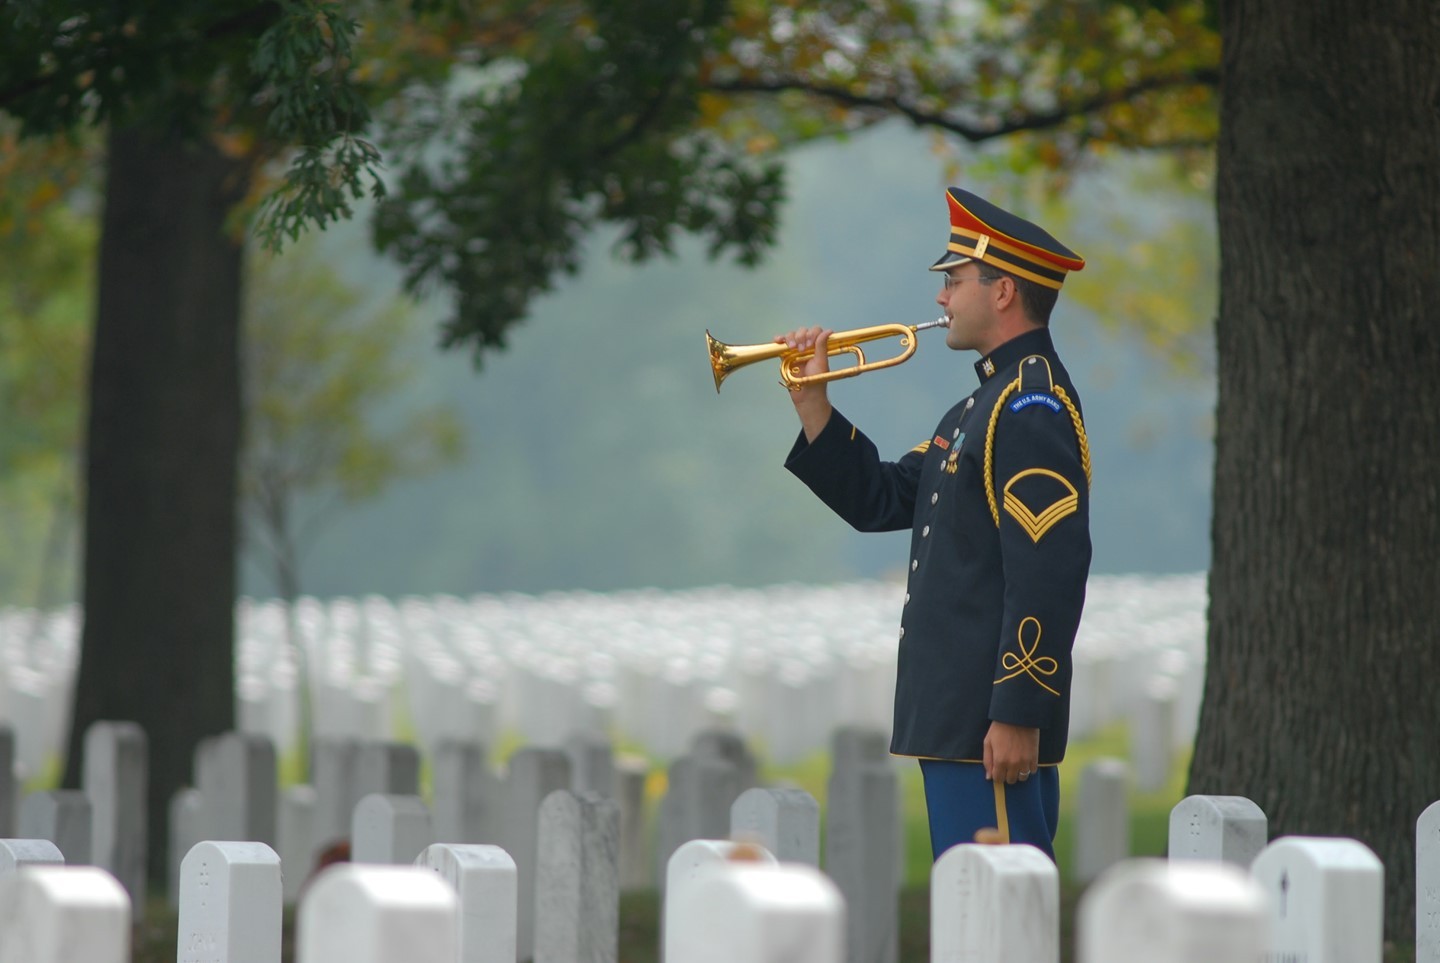 A bugler plays the lonesome call of Taps during a service covered by @arlingtonmedia

The bugle call known as "Taps" dates from the American Civil War. In July 1862, while the Army of the Potomac camped near Harrison's Landing, Virginia, Brigadier General Daniel Butterfield summoned Private Oliver Wilcox Norton, his brigade bugler, to his tent. Butterfield, who disliked the colorless "lights out" call then in use, whistled a different tune and asked the bugler to play it for him. After repeated trials, Norton played a 24-note call which suited the general. (According to some interpretations, Butterfield's tune was a variation on an earlier bugle call, the "Scott Tattoo," first published in 1835.) Butterfield then ordered that within his brigade, the new call would replace the regulation Army Taps. The next day, buglers from nearby brigades came to the camp of Butterfield's brigade to ask about the new call. They liked the tune and copied the music. During the Civil War, its popularity spread throughout Union ranks, and even among some Confederate forces.

Shortly after Butterfield composed the tune, Taps was first sounded at a military funeral for a Union cannoneer killed in action. The deceased soldier's commanding officer believed that a bugle call would be less risky than the traditional three-rifle volley, which the enemy could misinterpret as an attack. In 1874, Butterfield's Taps became the U.S. Army's official bugle call. Taps has been used by the U.S. armed forces ever since — at the end of the day, during flag ceremonies and at military funerals. Whenever a service member is buried with military honors anywhere in the United States, the ceremony concludes with the three-rifle volley and the sounding of Taps on a trumpet or bugle. Melancholy yet serene, the call lingers in memory.

The name "Taps" derives from the fact that the lights-out call was traditionally followed by three drum taps.